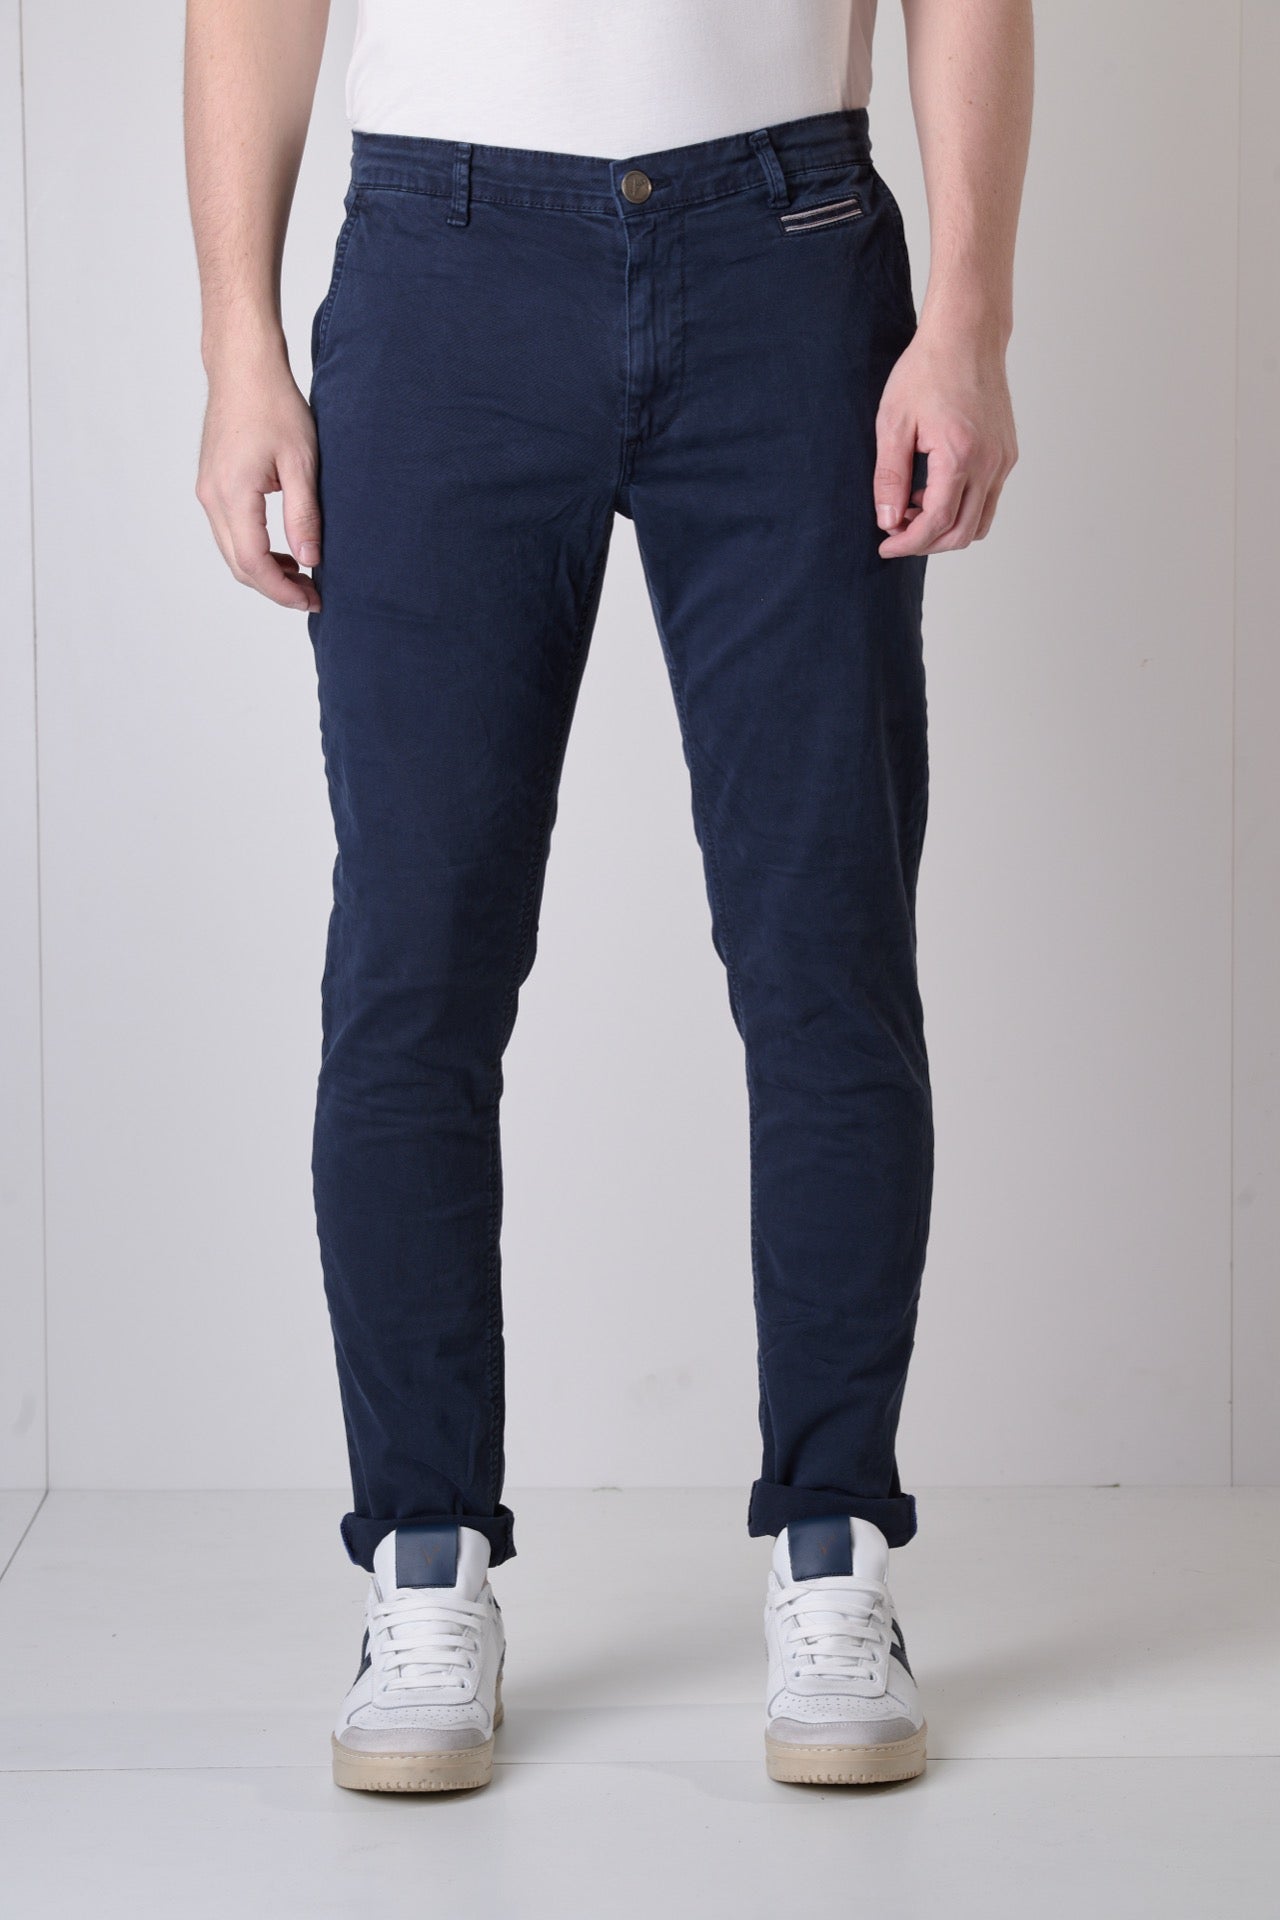 ROMA - Blue Chino Trousers